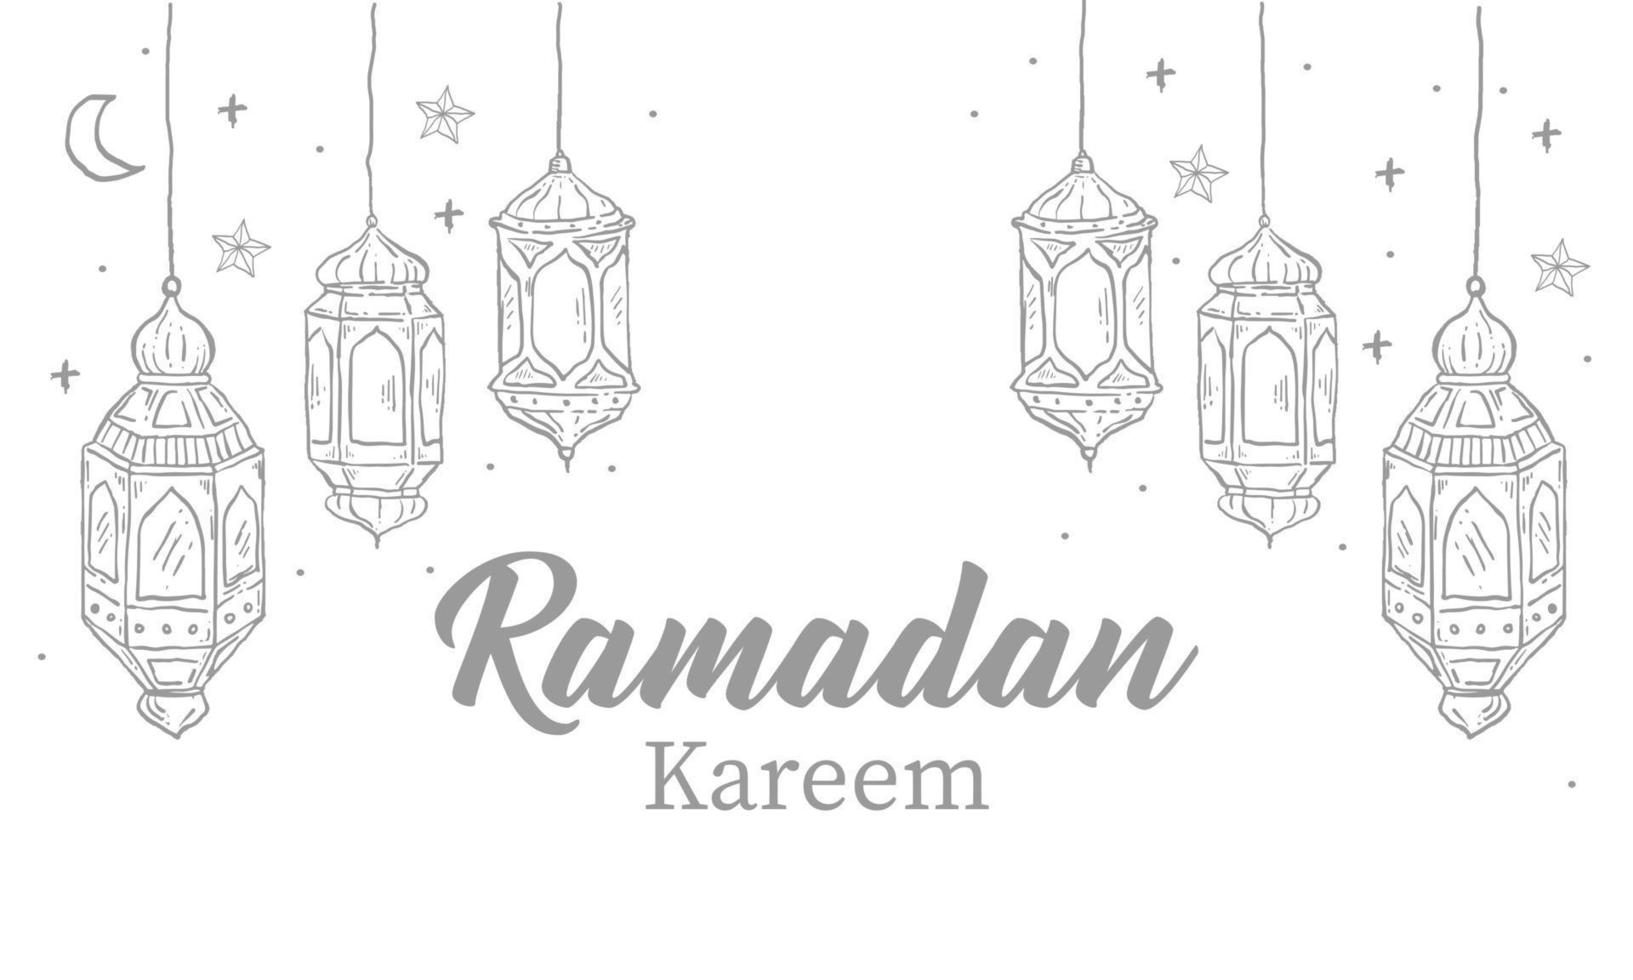 Ramadan Kareem greeting card with islamic . Vintage hand drawn vector illustration Isolated on white background..